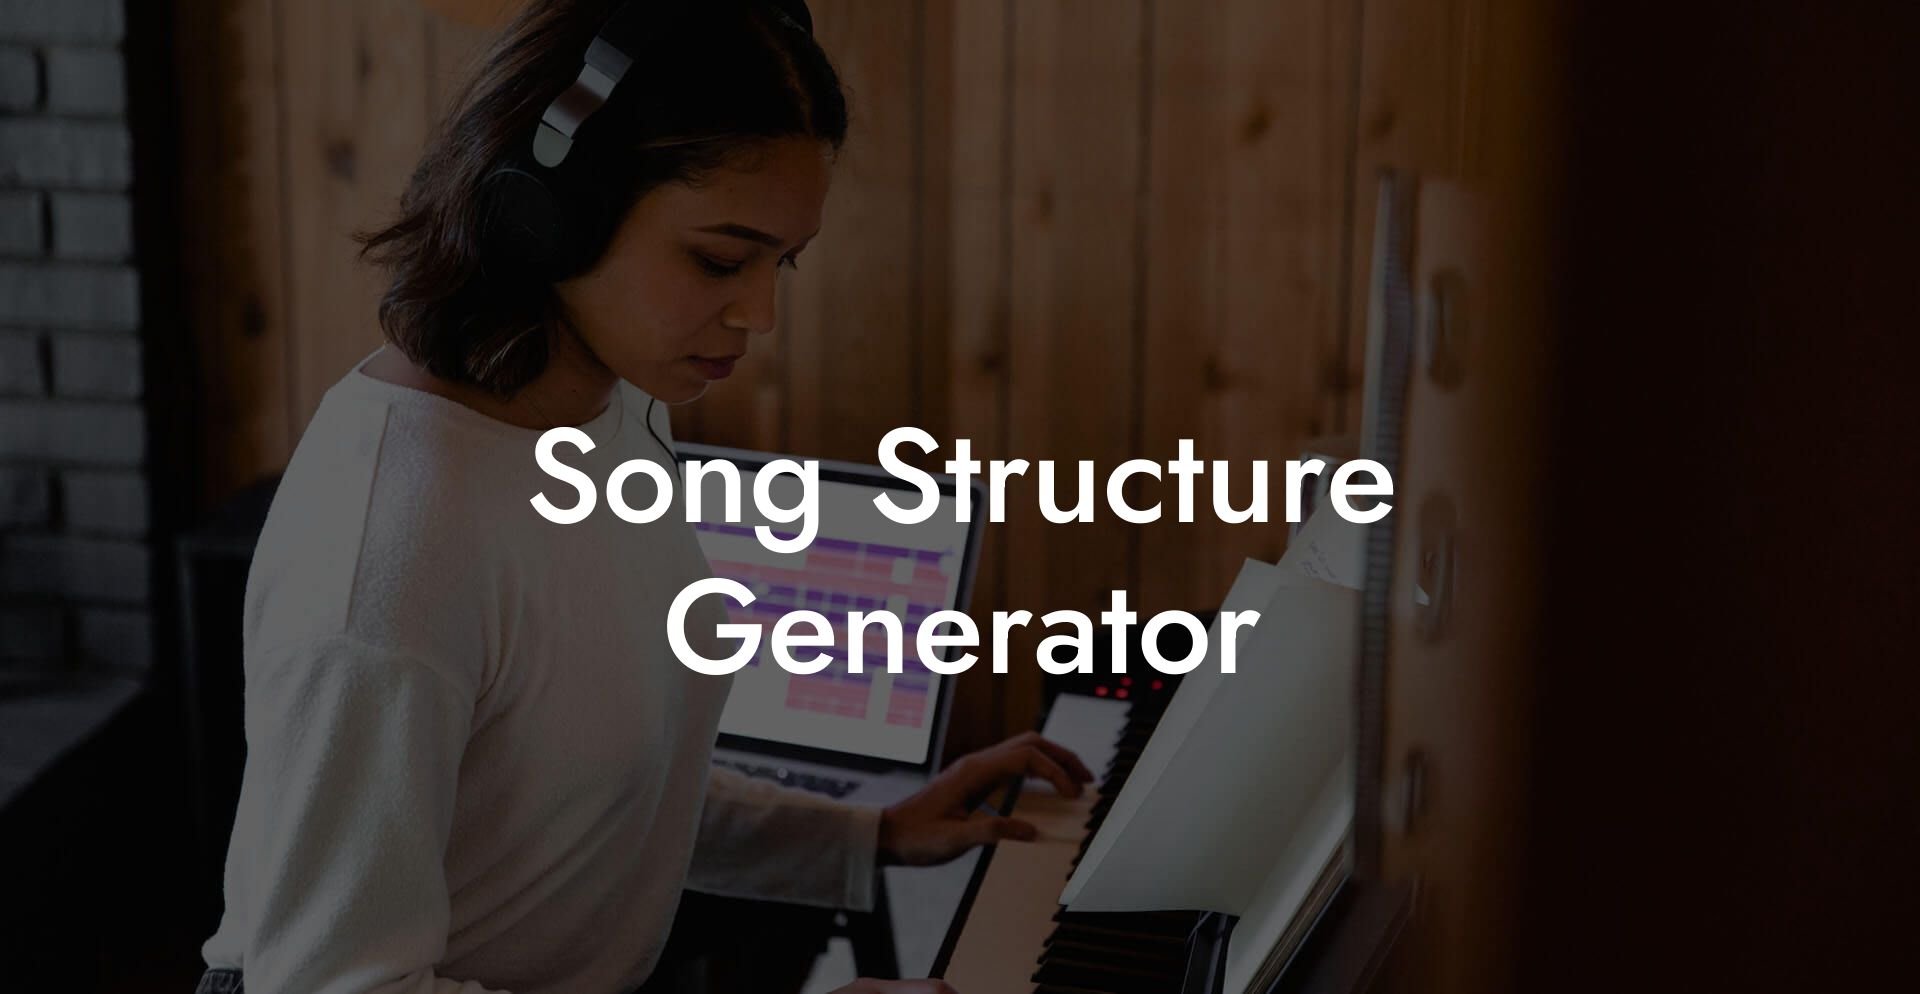 song structure generator lyric assistant